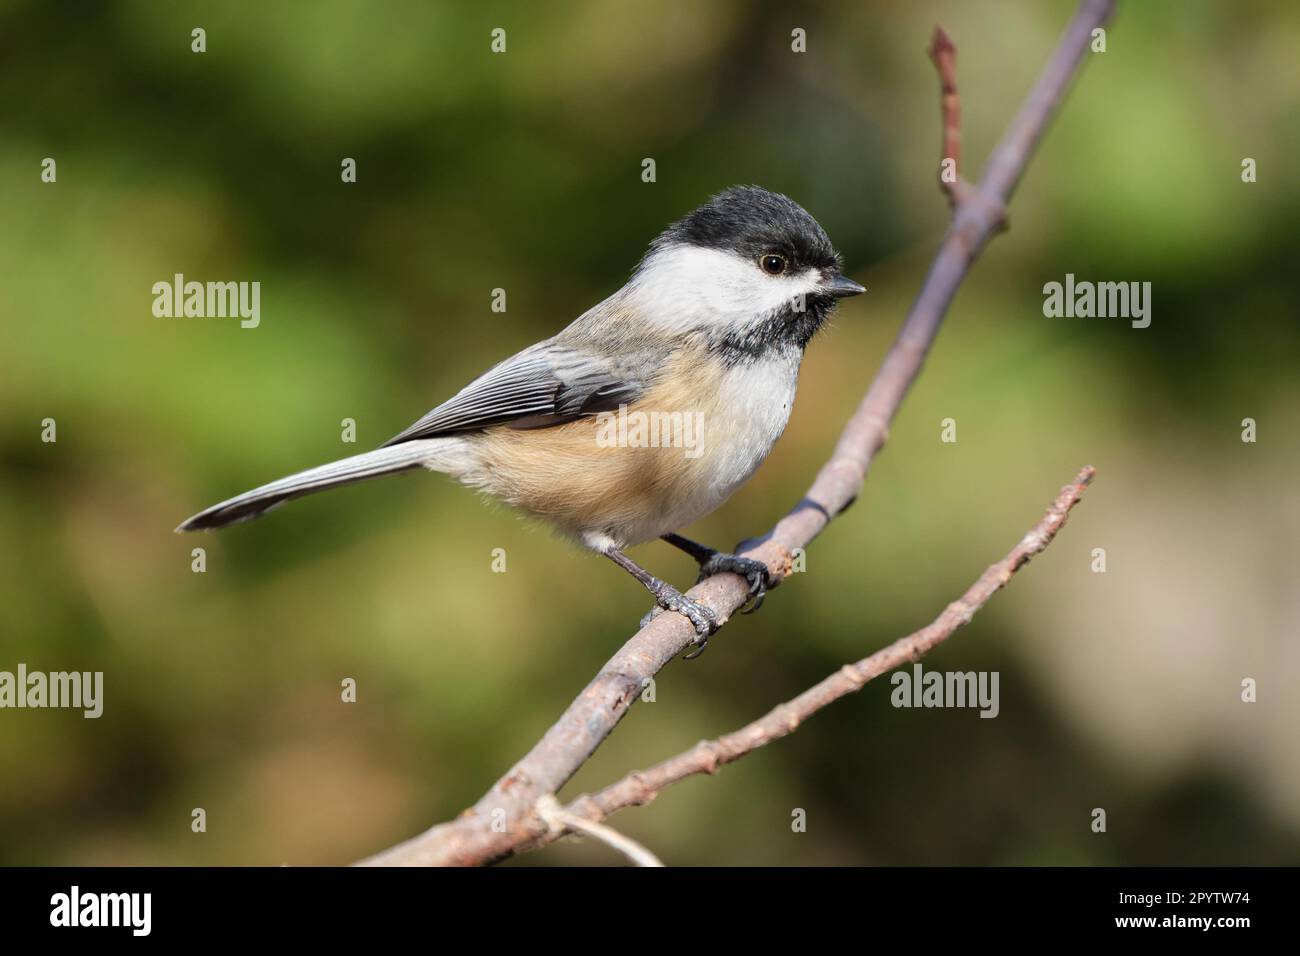 Black-capped Chickadee, Poecile atricapillus, perched on a branch against autumn colours Stock Photo